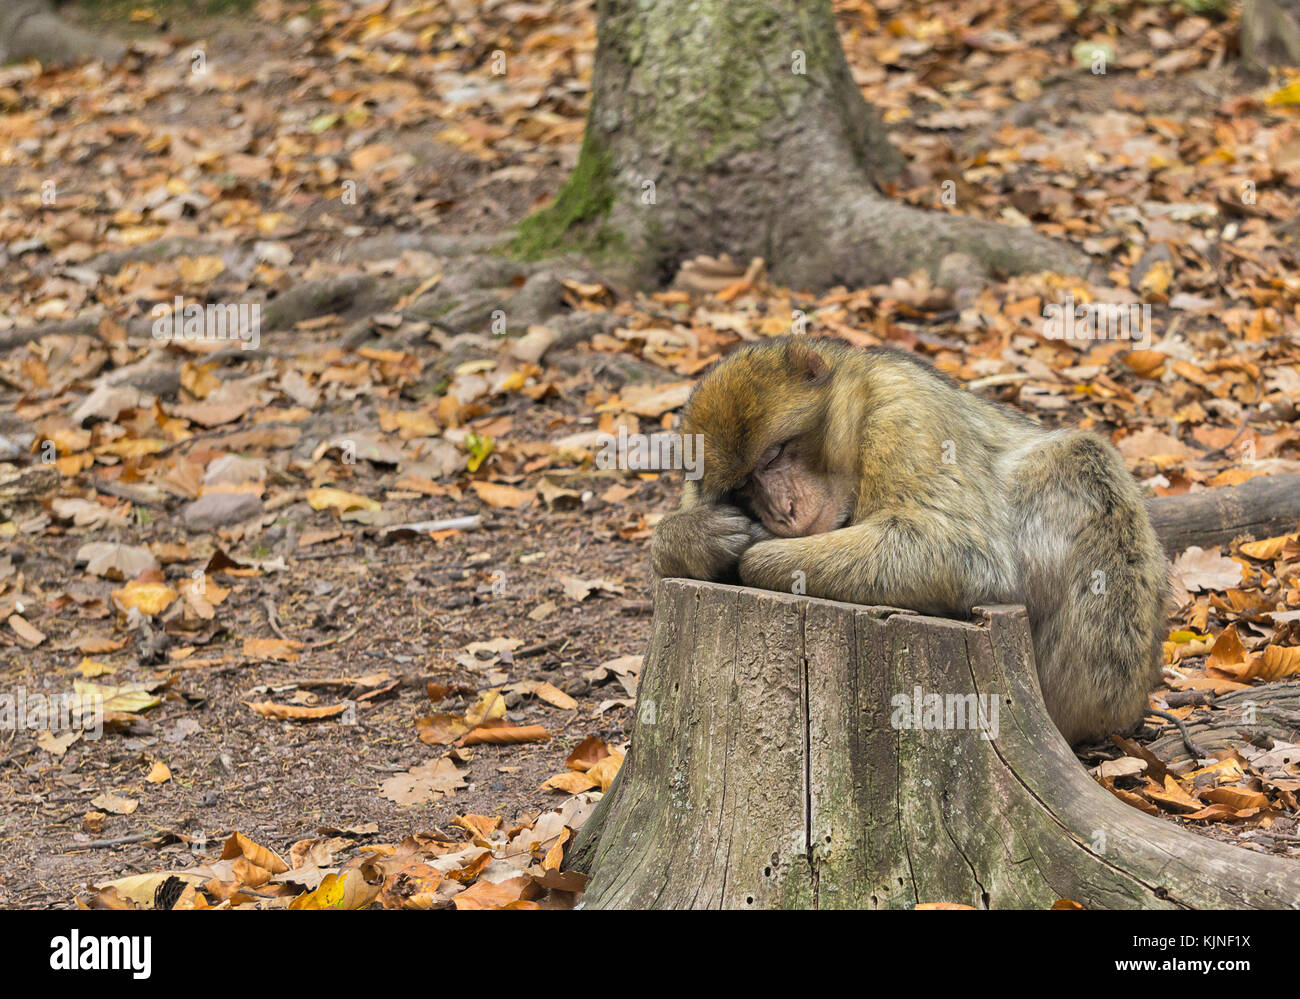 A cute monkey (barbary ape, macaca sylvanus) sleeping on a tree trunk in the forest in fall. Stock Photo